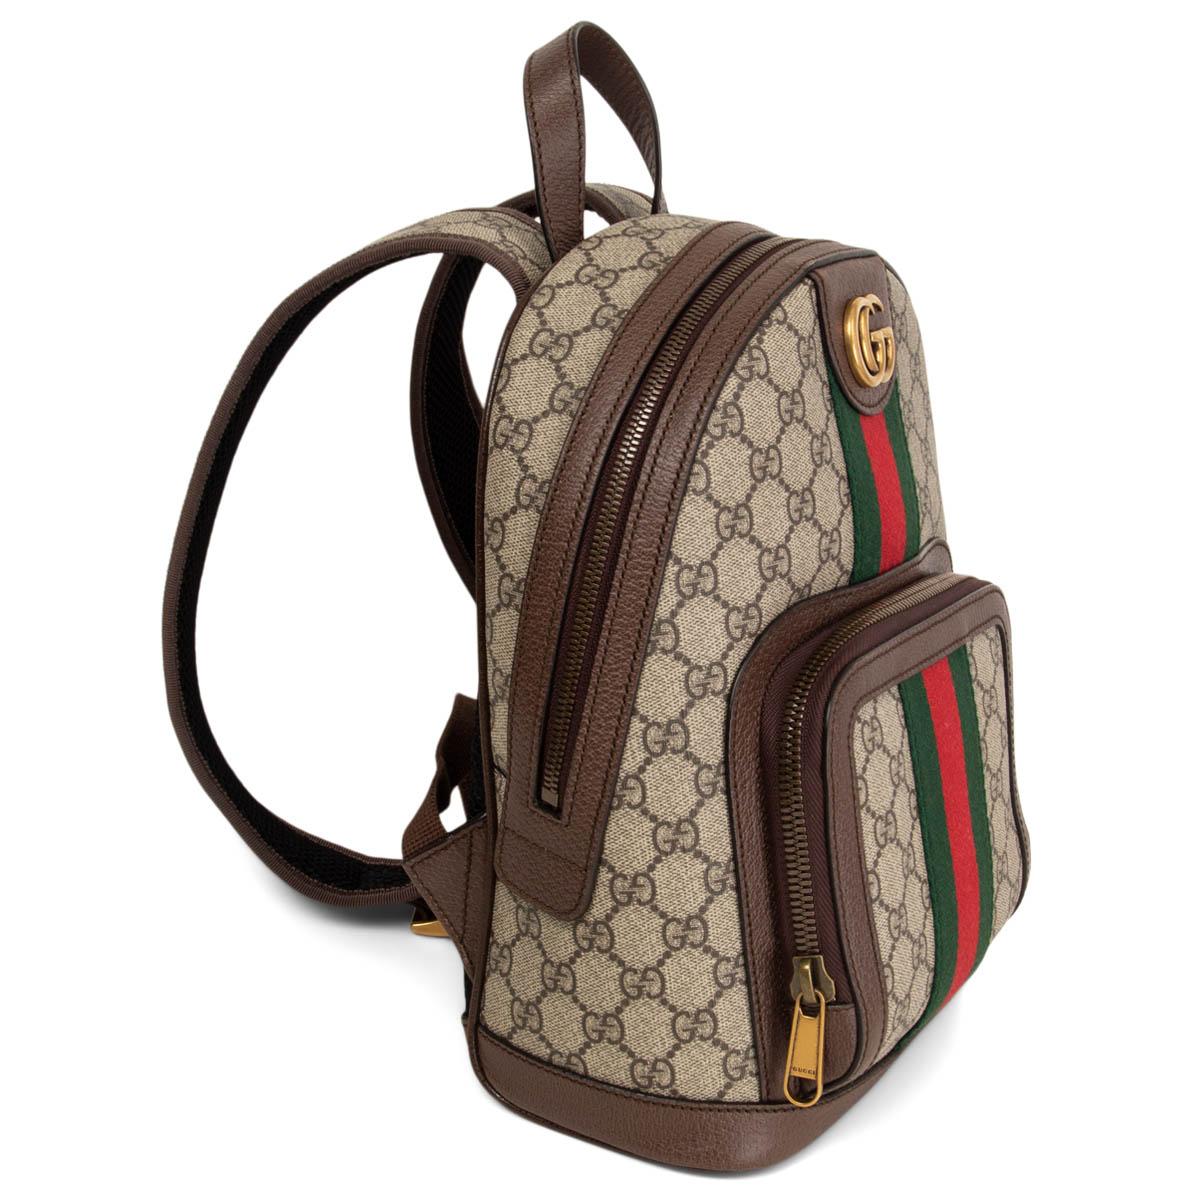 100% authentic Gucci Ophidia Small backpack in beige and ebony GG Supreme canvas and brown leather trim. Featuring green and red web stripe and double G in metal. Outside zipper pocket and adjustable strap. Lined in canvas with smartphone pockets